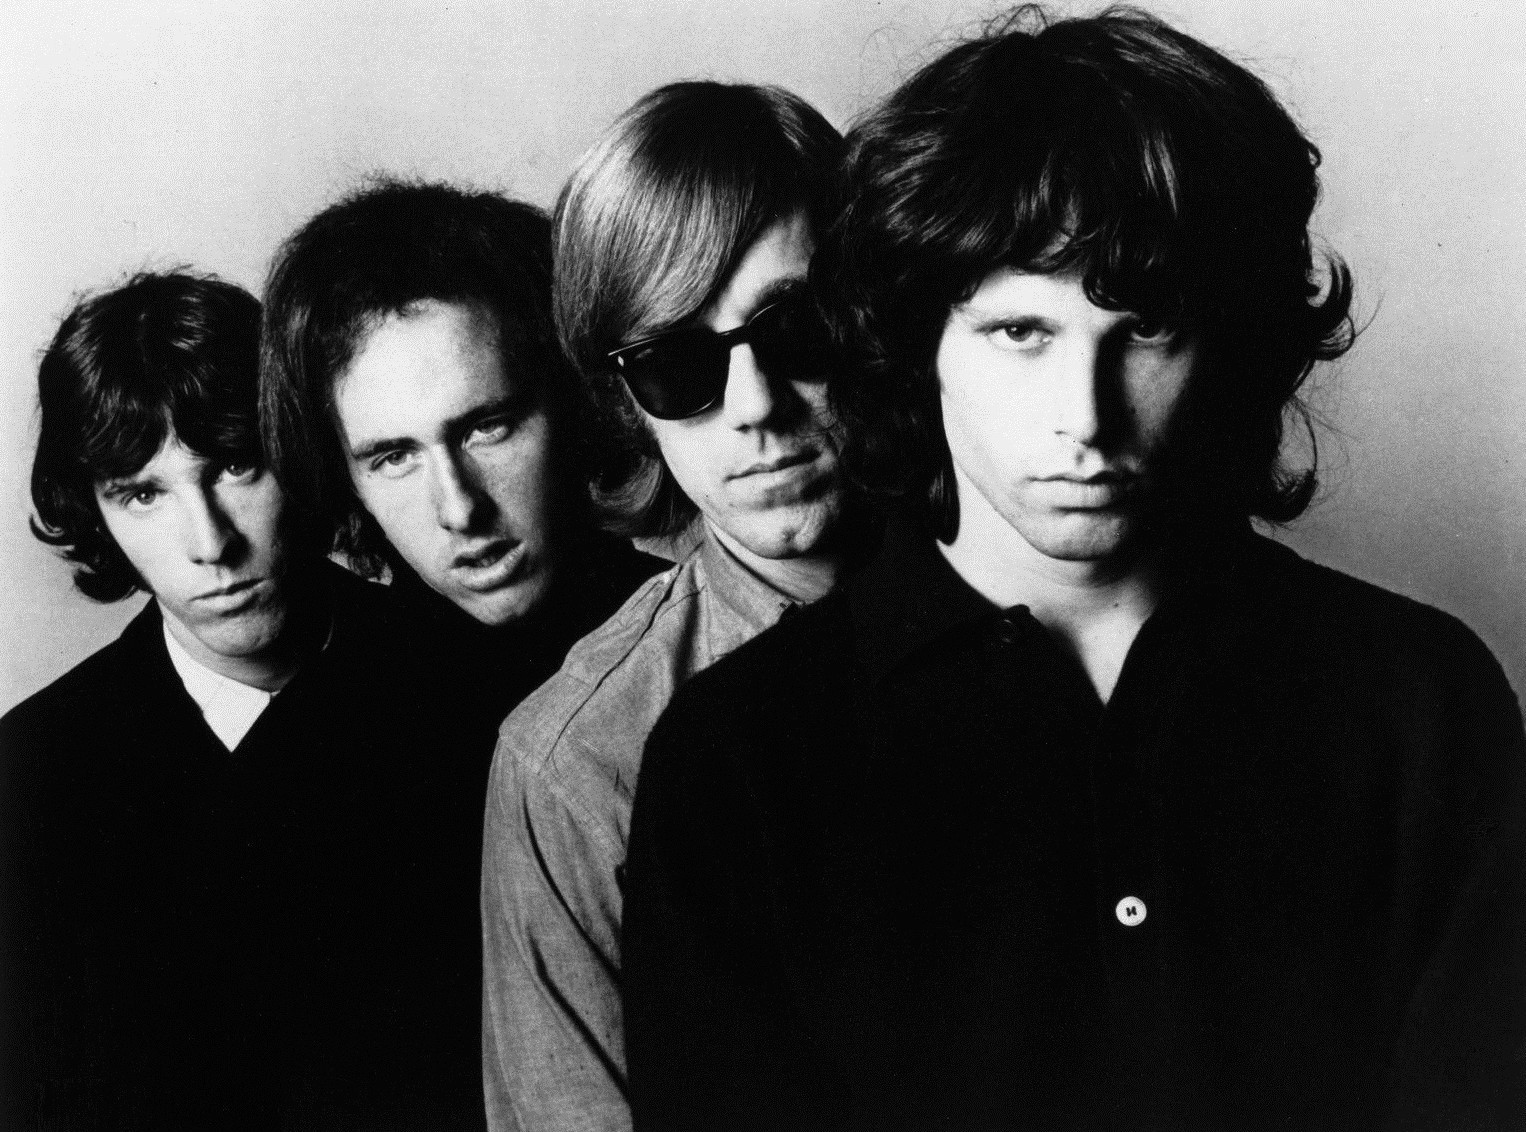 Track-by-track: The Doors – LA Woman